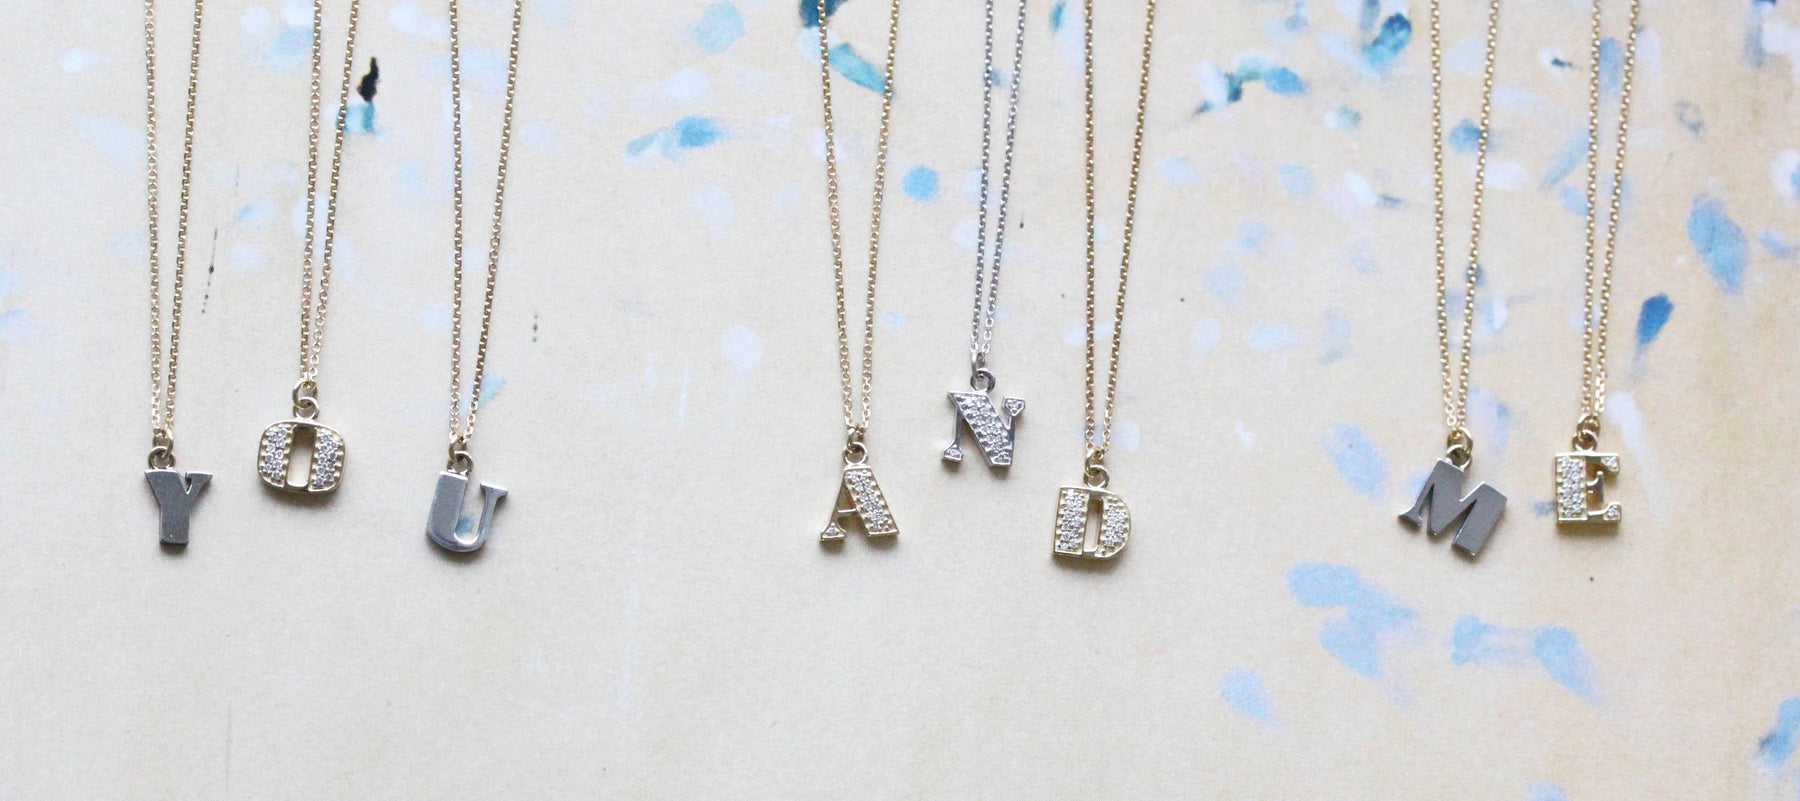 Introducing our new Alphabet Necklaces ✨